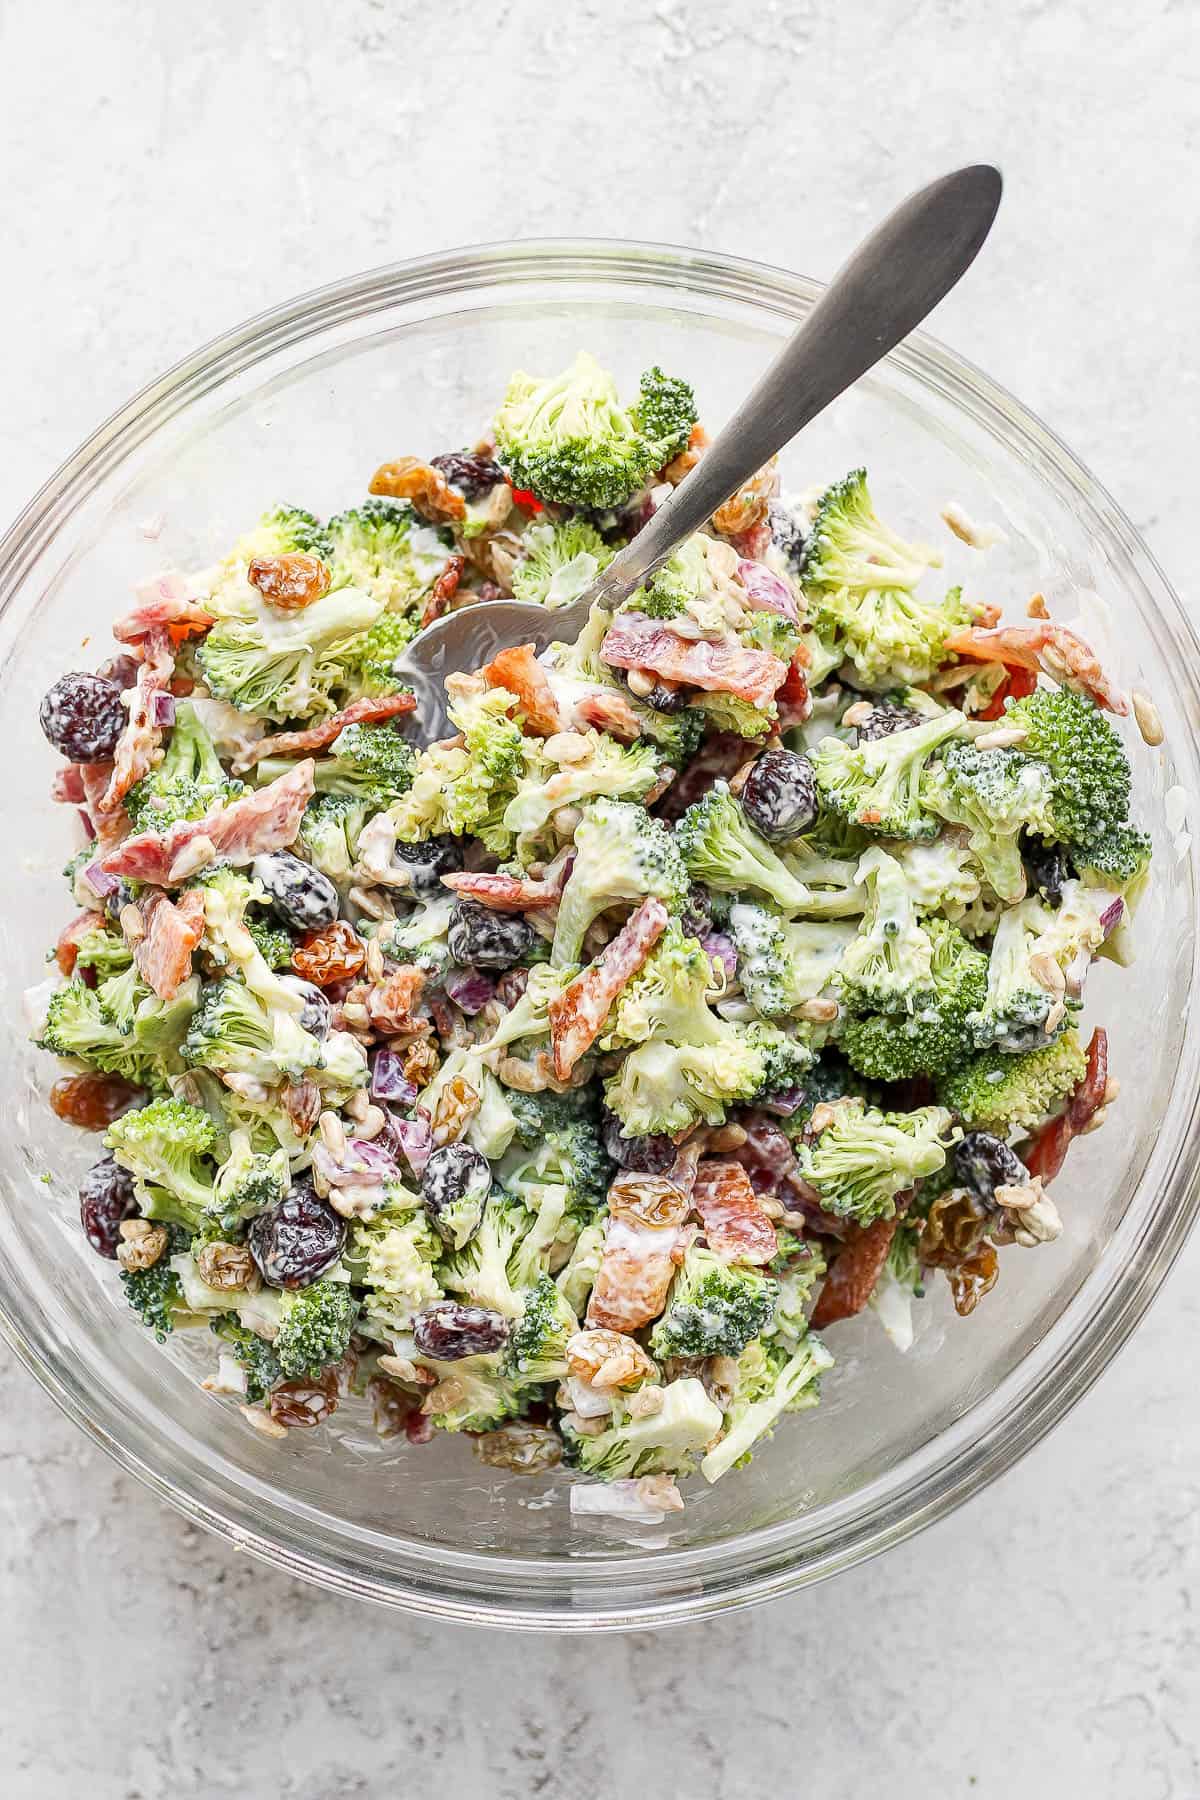 Broccoli bacon salad all mixed together in a large bowl.